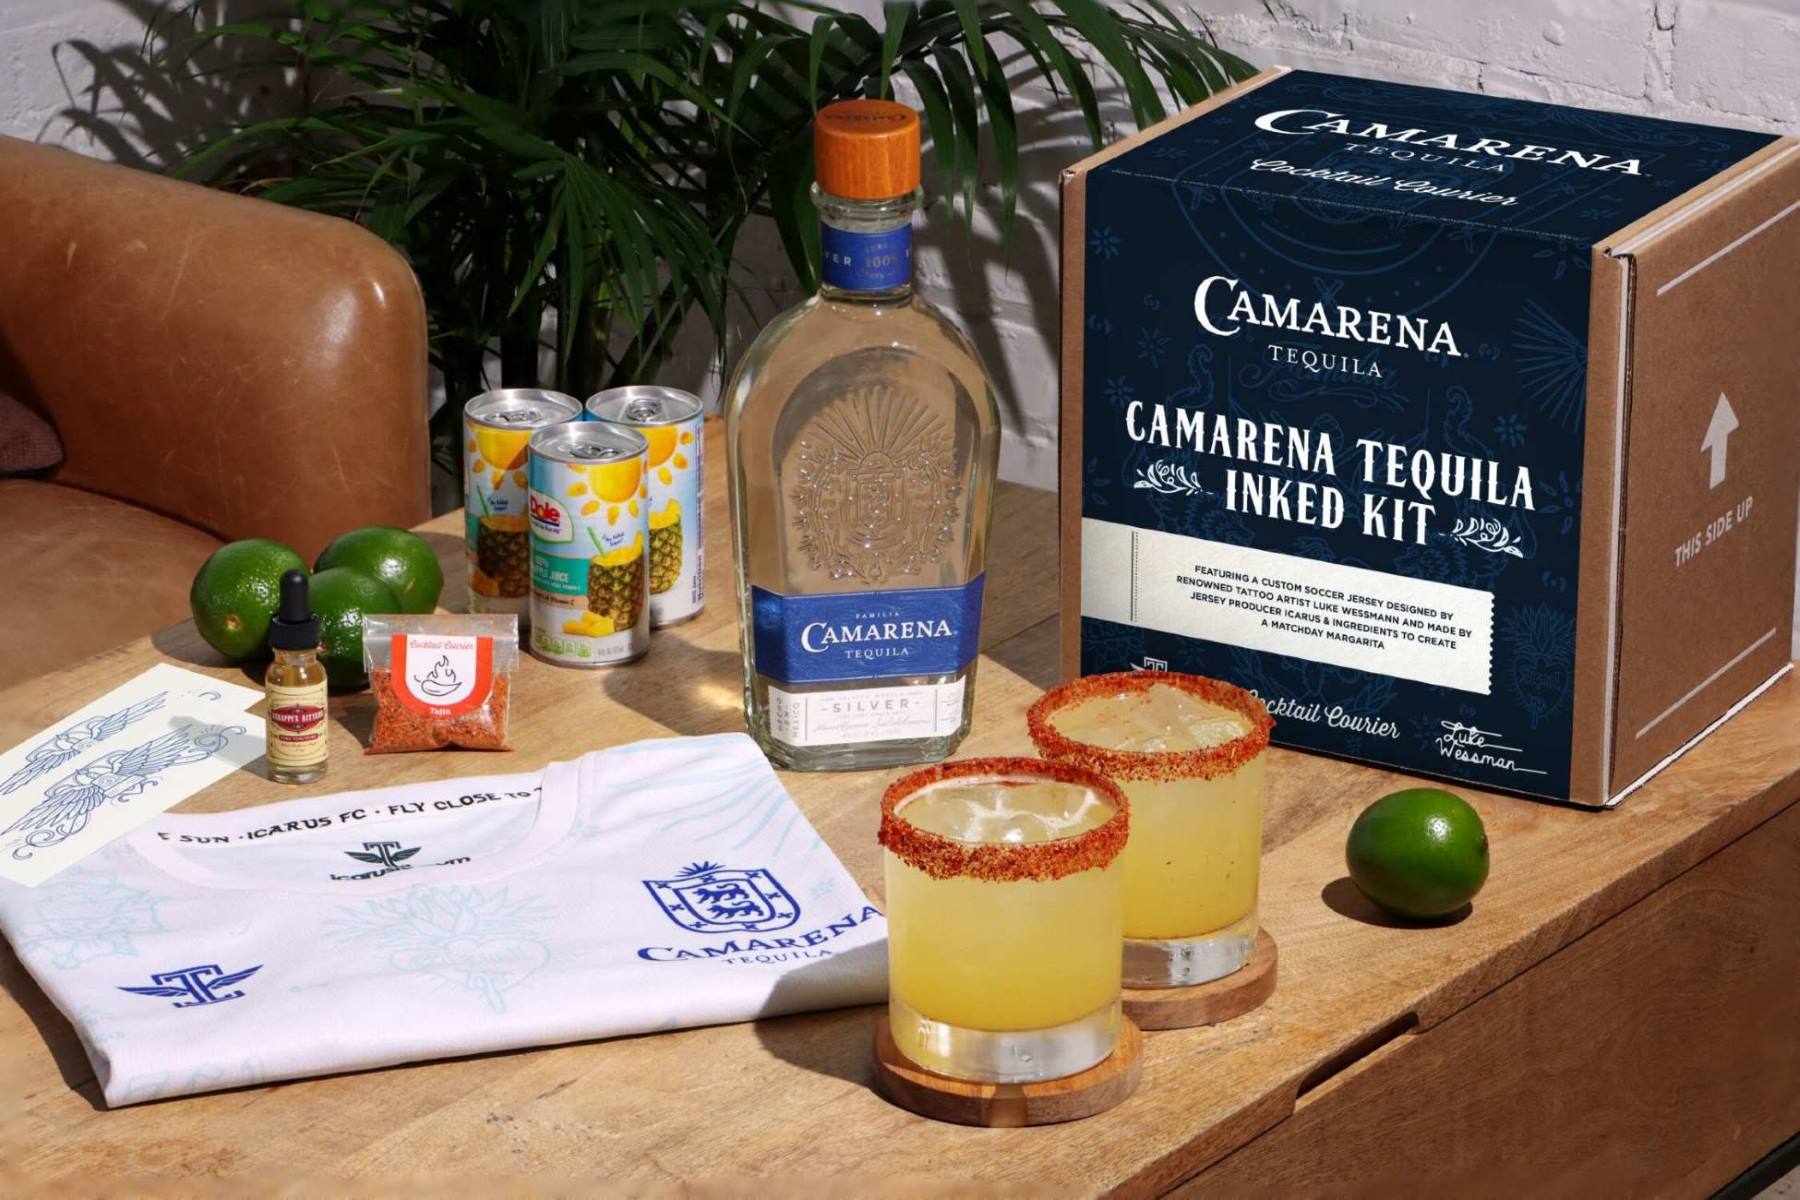 11-astonishing-facts-about-camarena-tequila